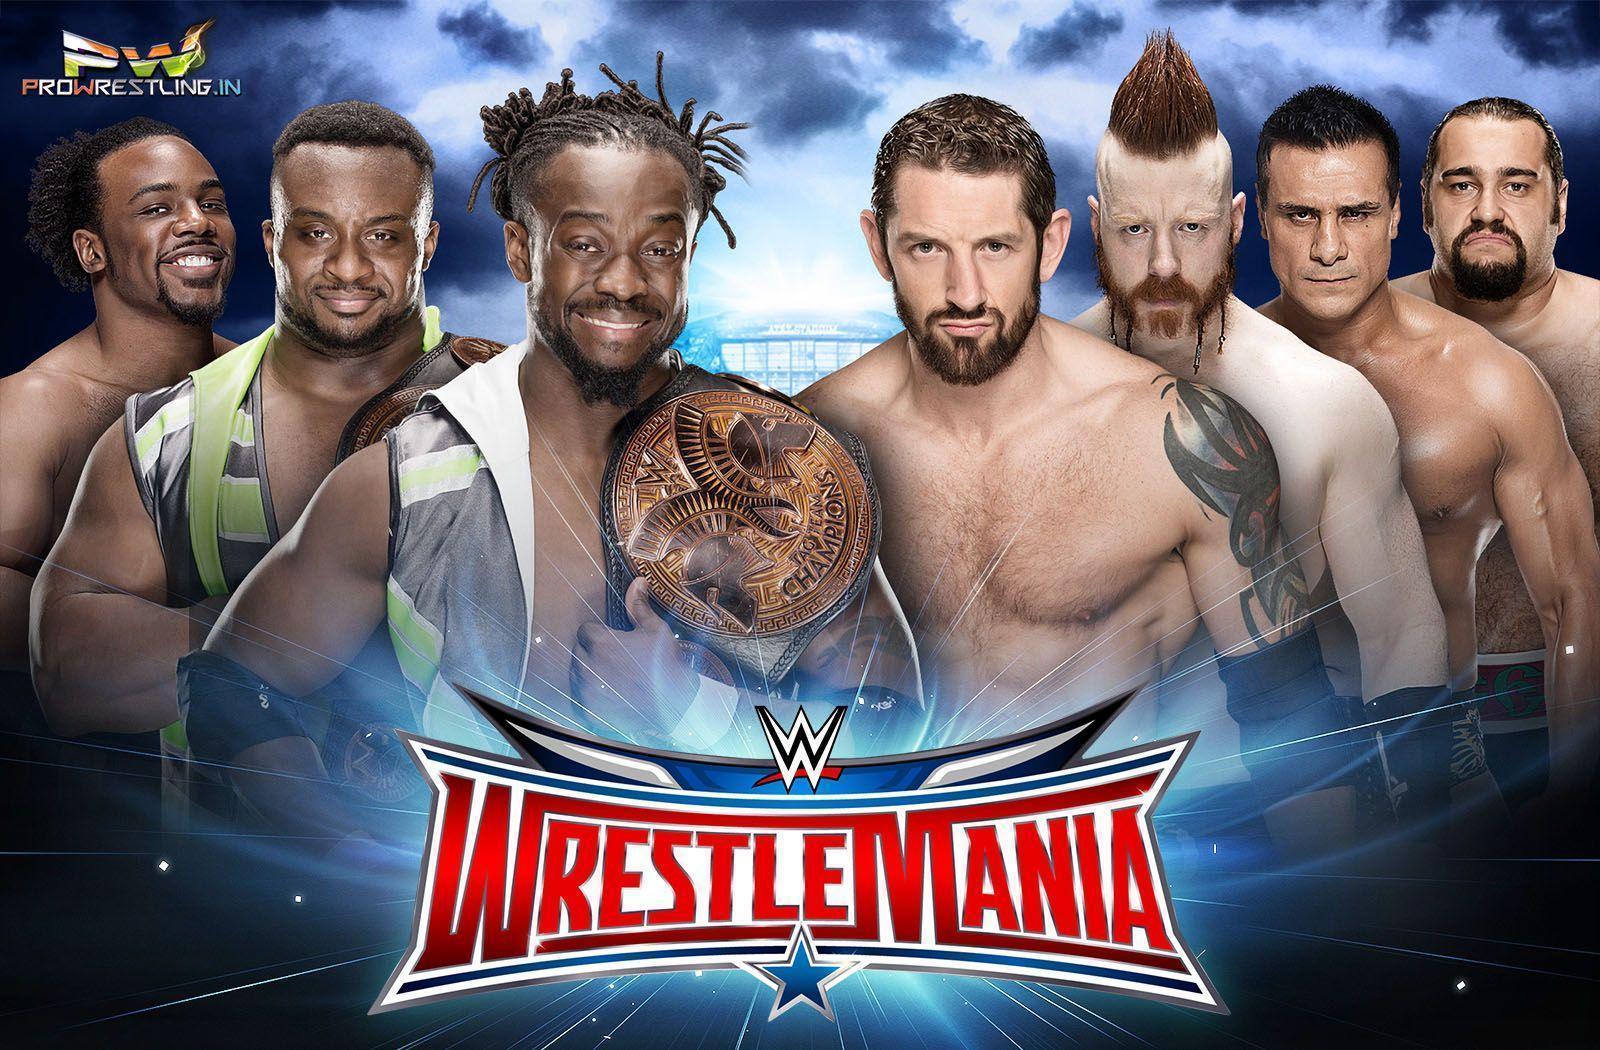 MBW76: WWE The New Day Wallpaper, WWE The New Day Photo In High